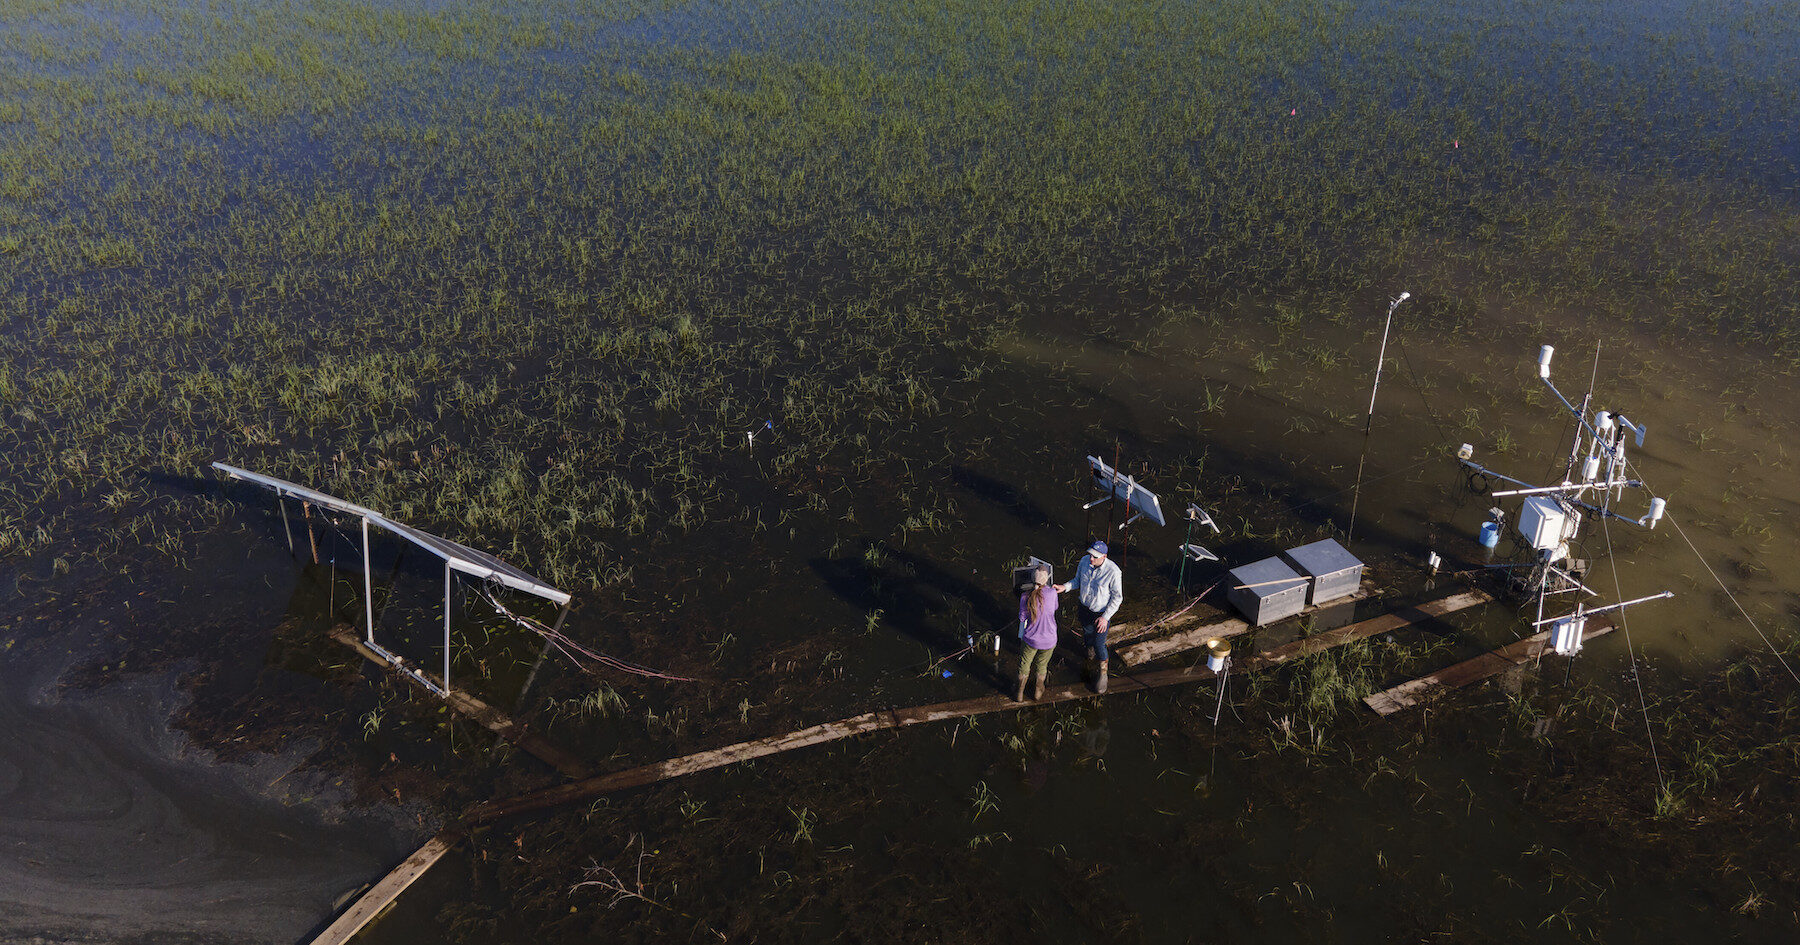 Two researchers stand on planks supporting flux towers in an Arkansas rice field, an expanse with green tips emerging from the water. Image credit: Rory Doyle (photojournalist).